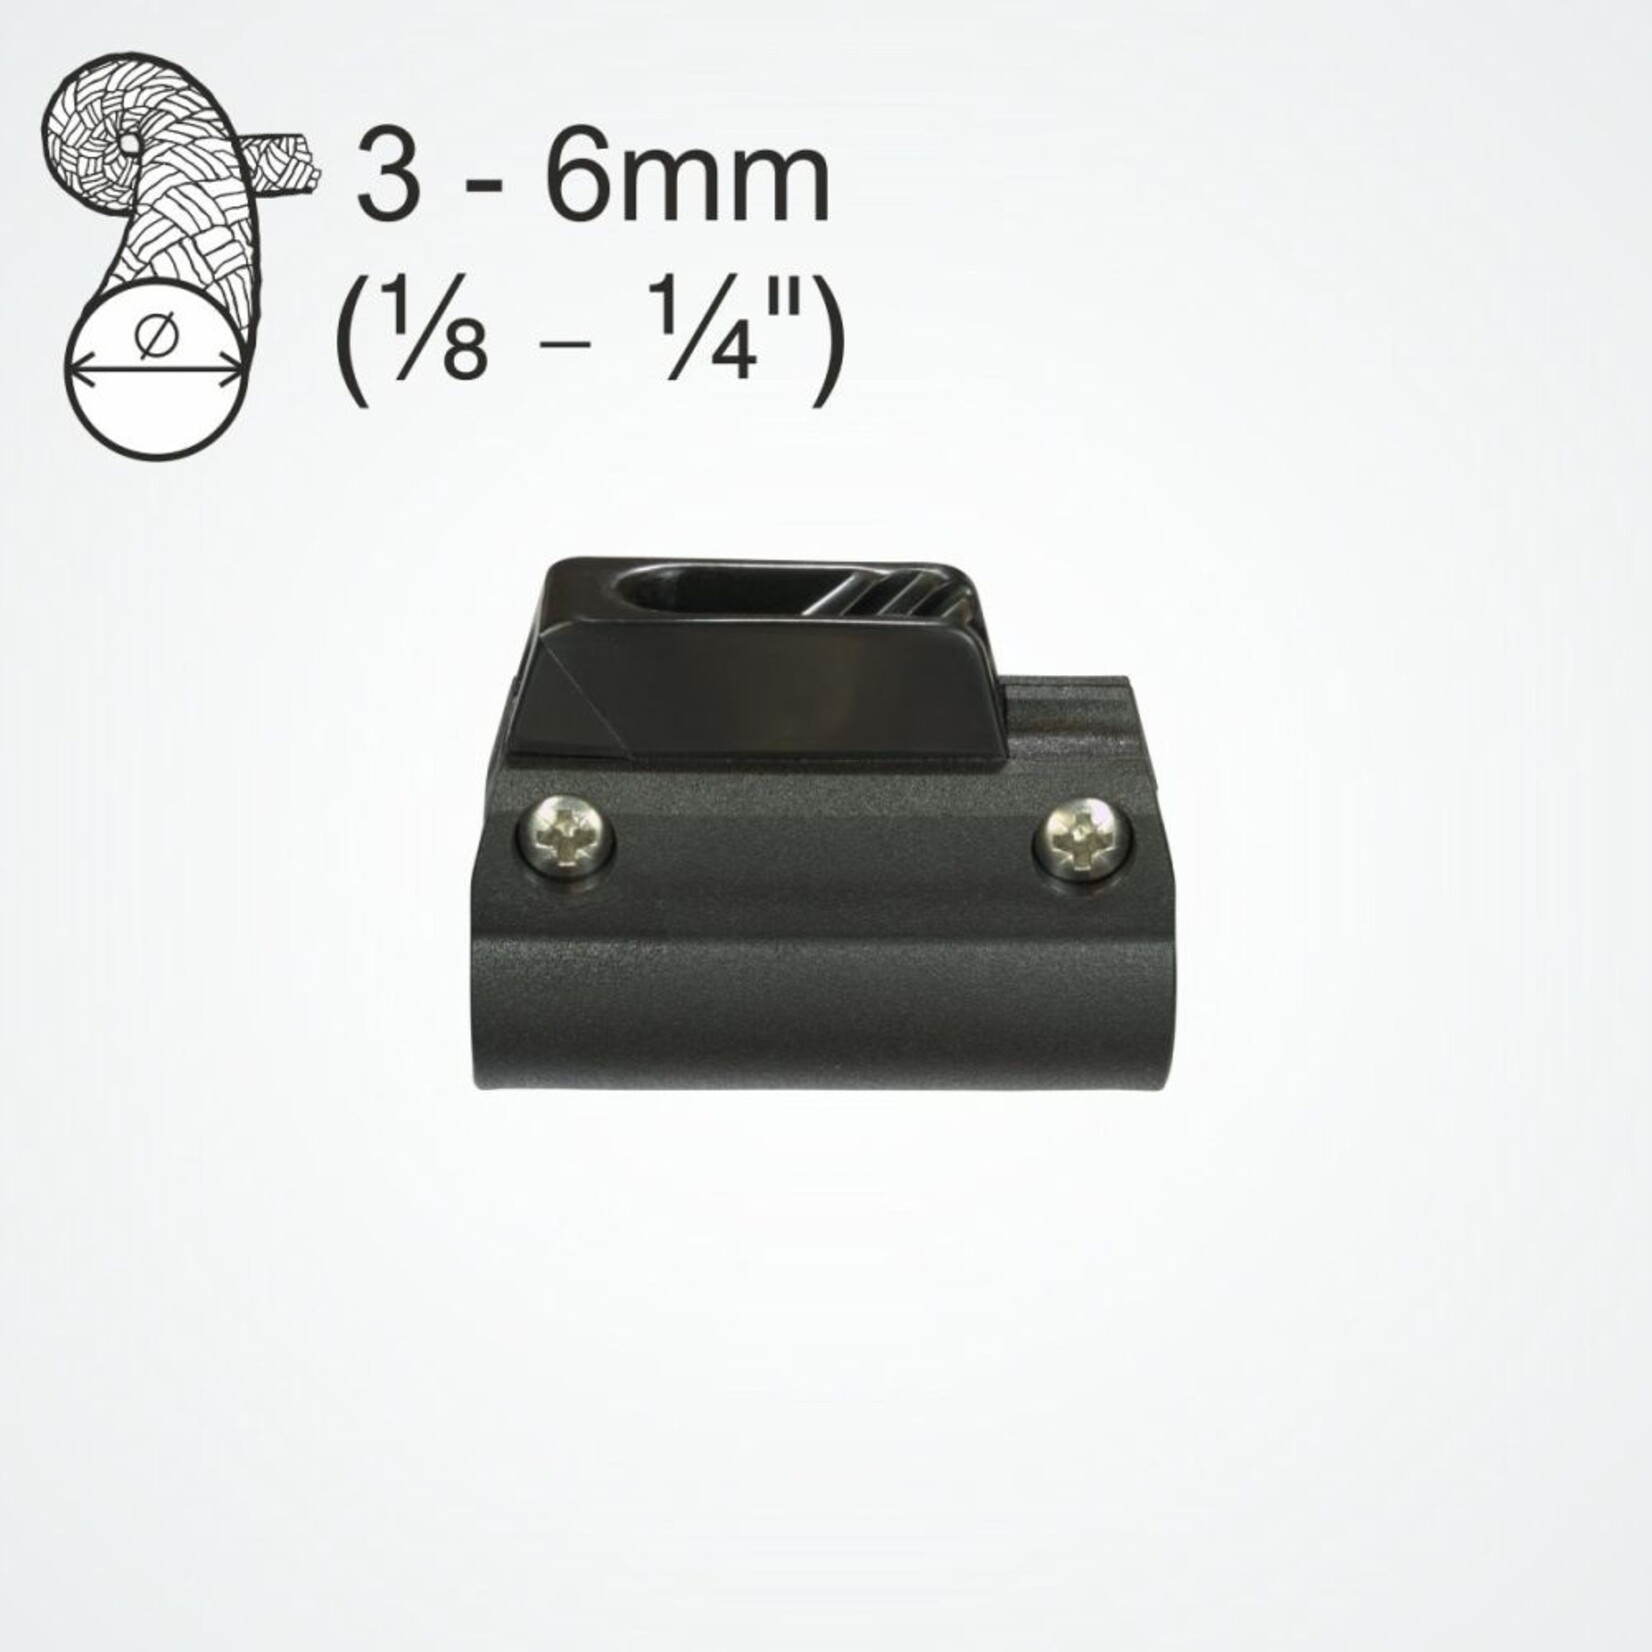 Clamcleat Nylon CL243. 1 x CL072 Strap to suit 20mm dia Pole. 2 x Screws. 1 x Rubber Packing Piece